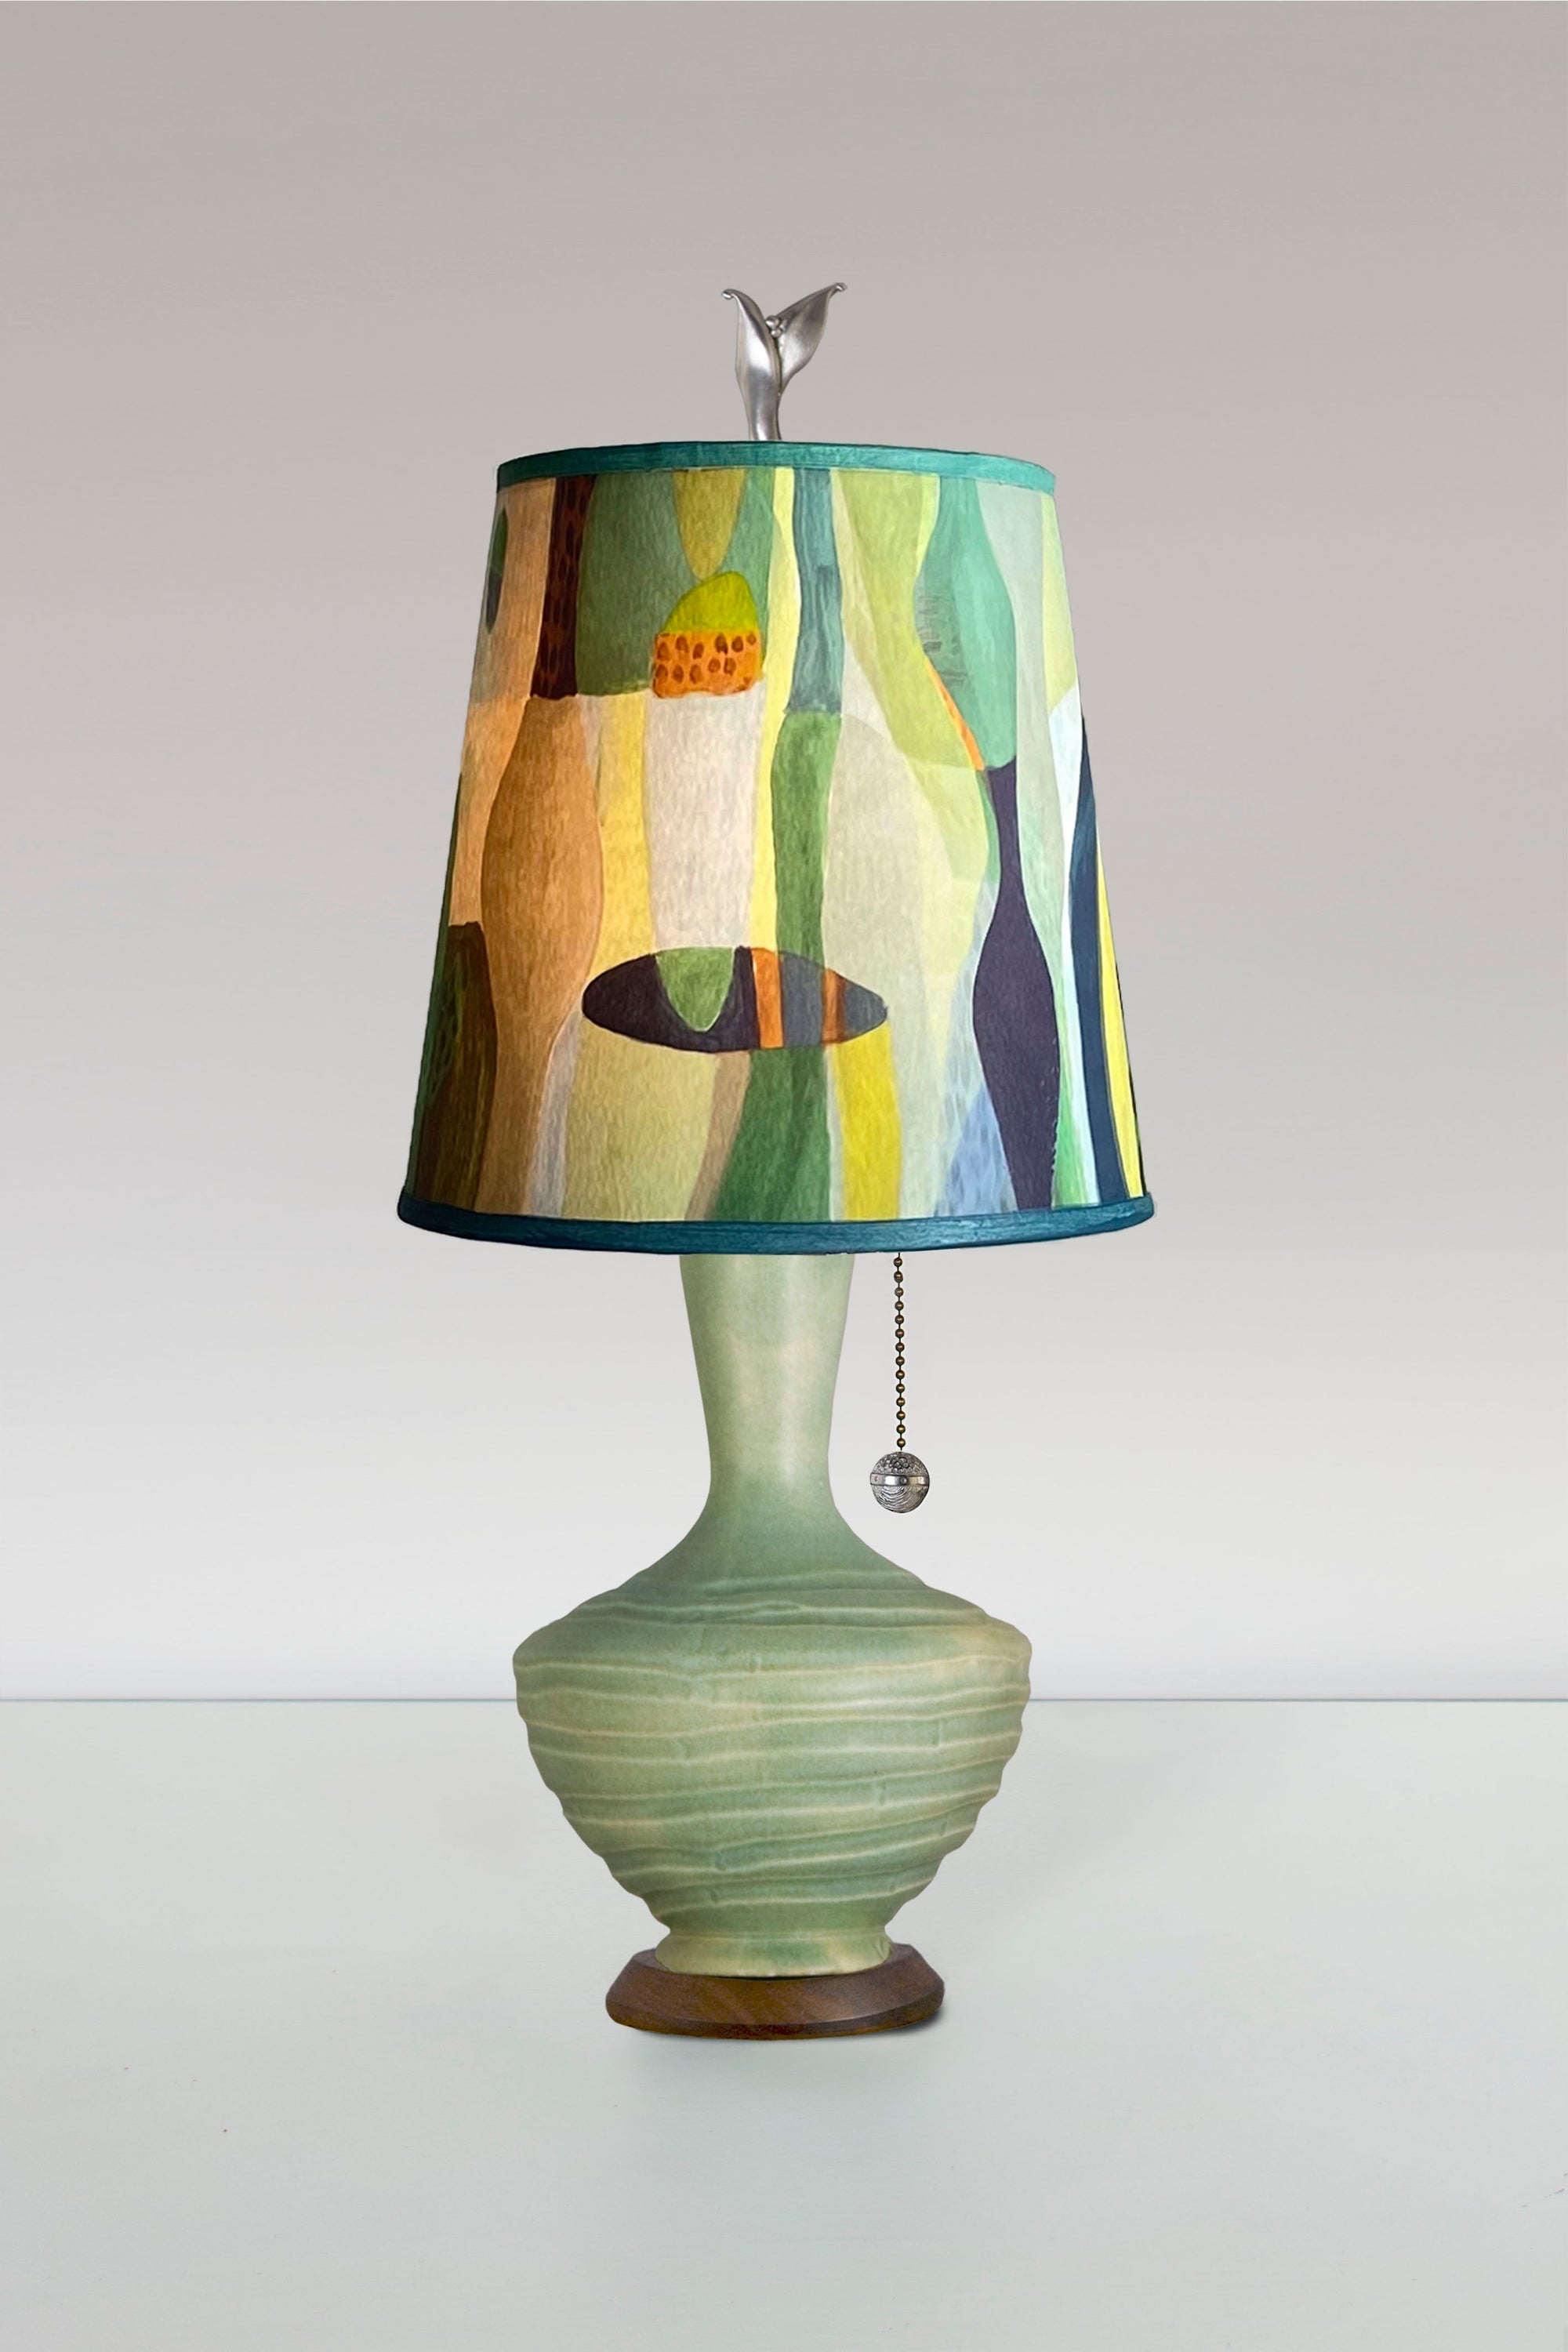 Janna Ugone & Co Table Lamp Ceramic Table Lamp in Old Copper with Small Drum Shade in Riviera in Citrus